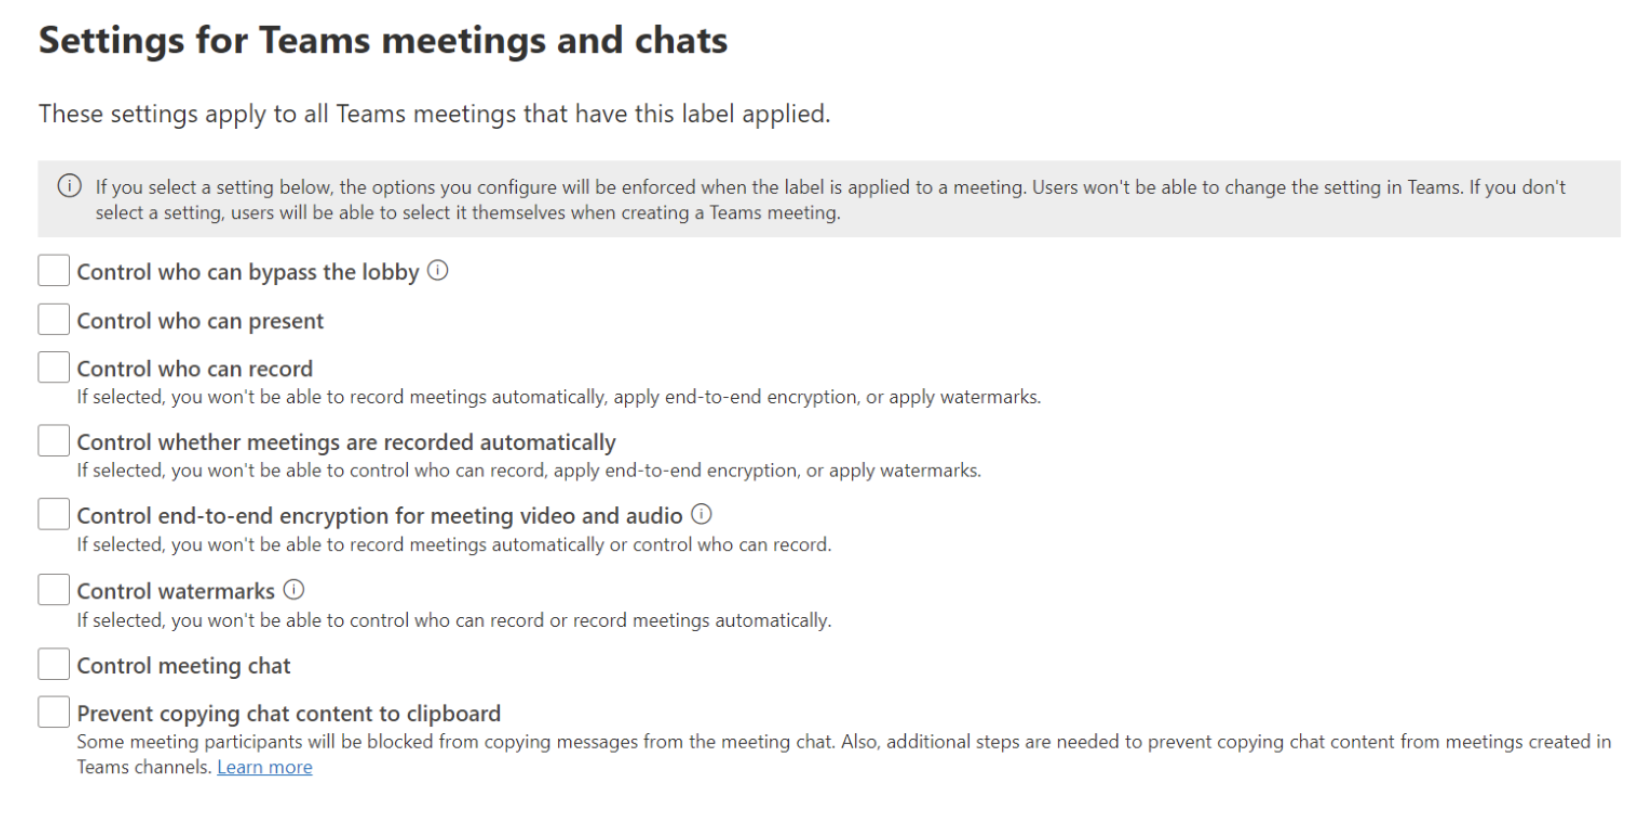 Settings For Teams Meetings And Chats